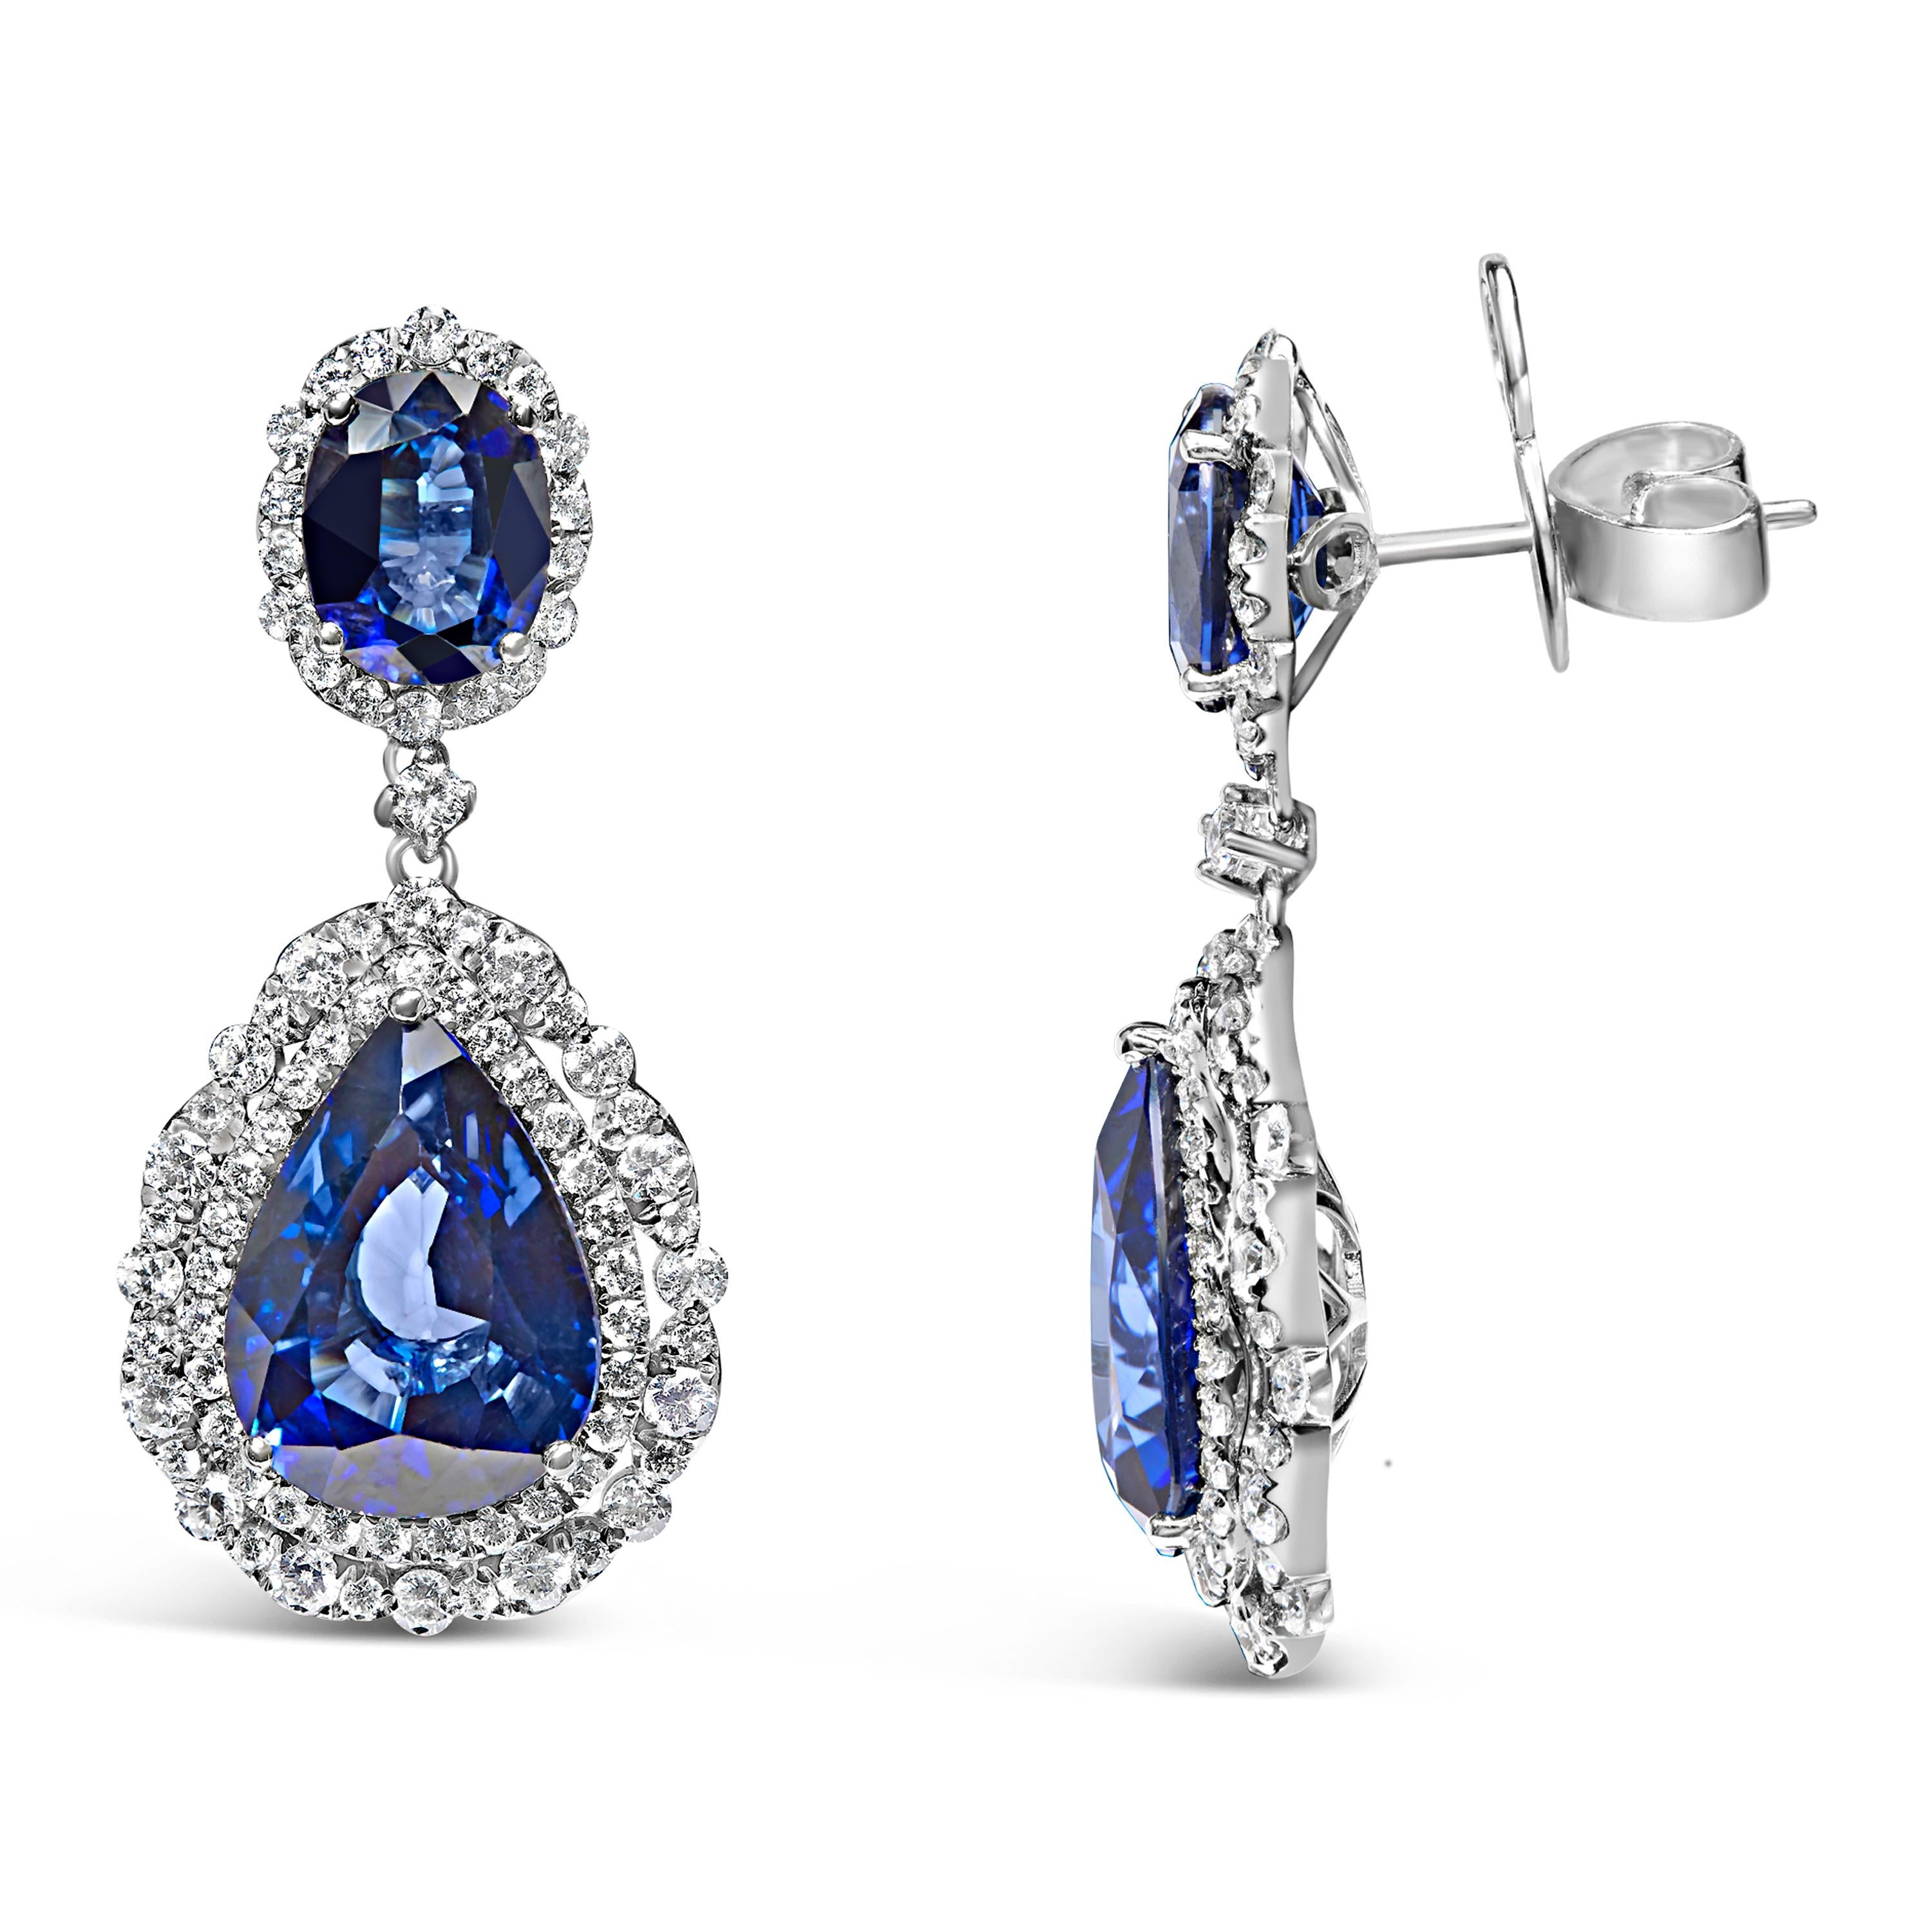 Adorn your ensemble with the sophistication of these 18K white gold earrings, featuring diffused blue sapphires accented with 2 3/4 carats of radiant diamonds. The highlight of each earring is the pear-shaped sapphires, with the larger measuring